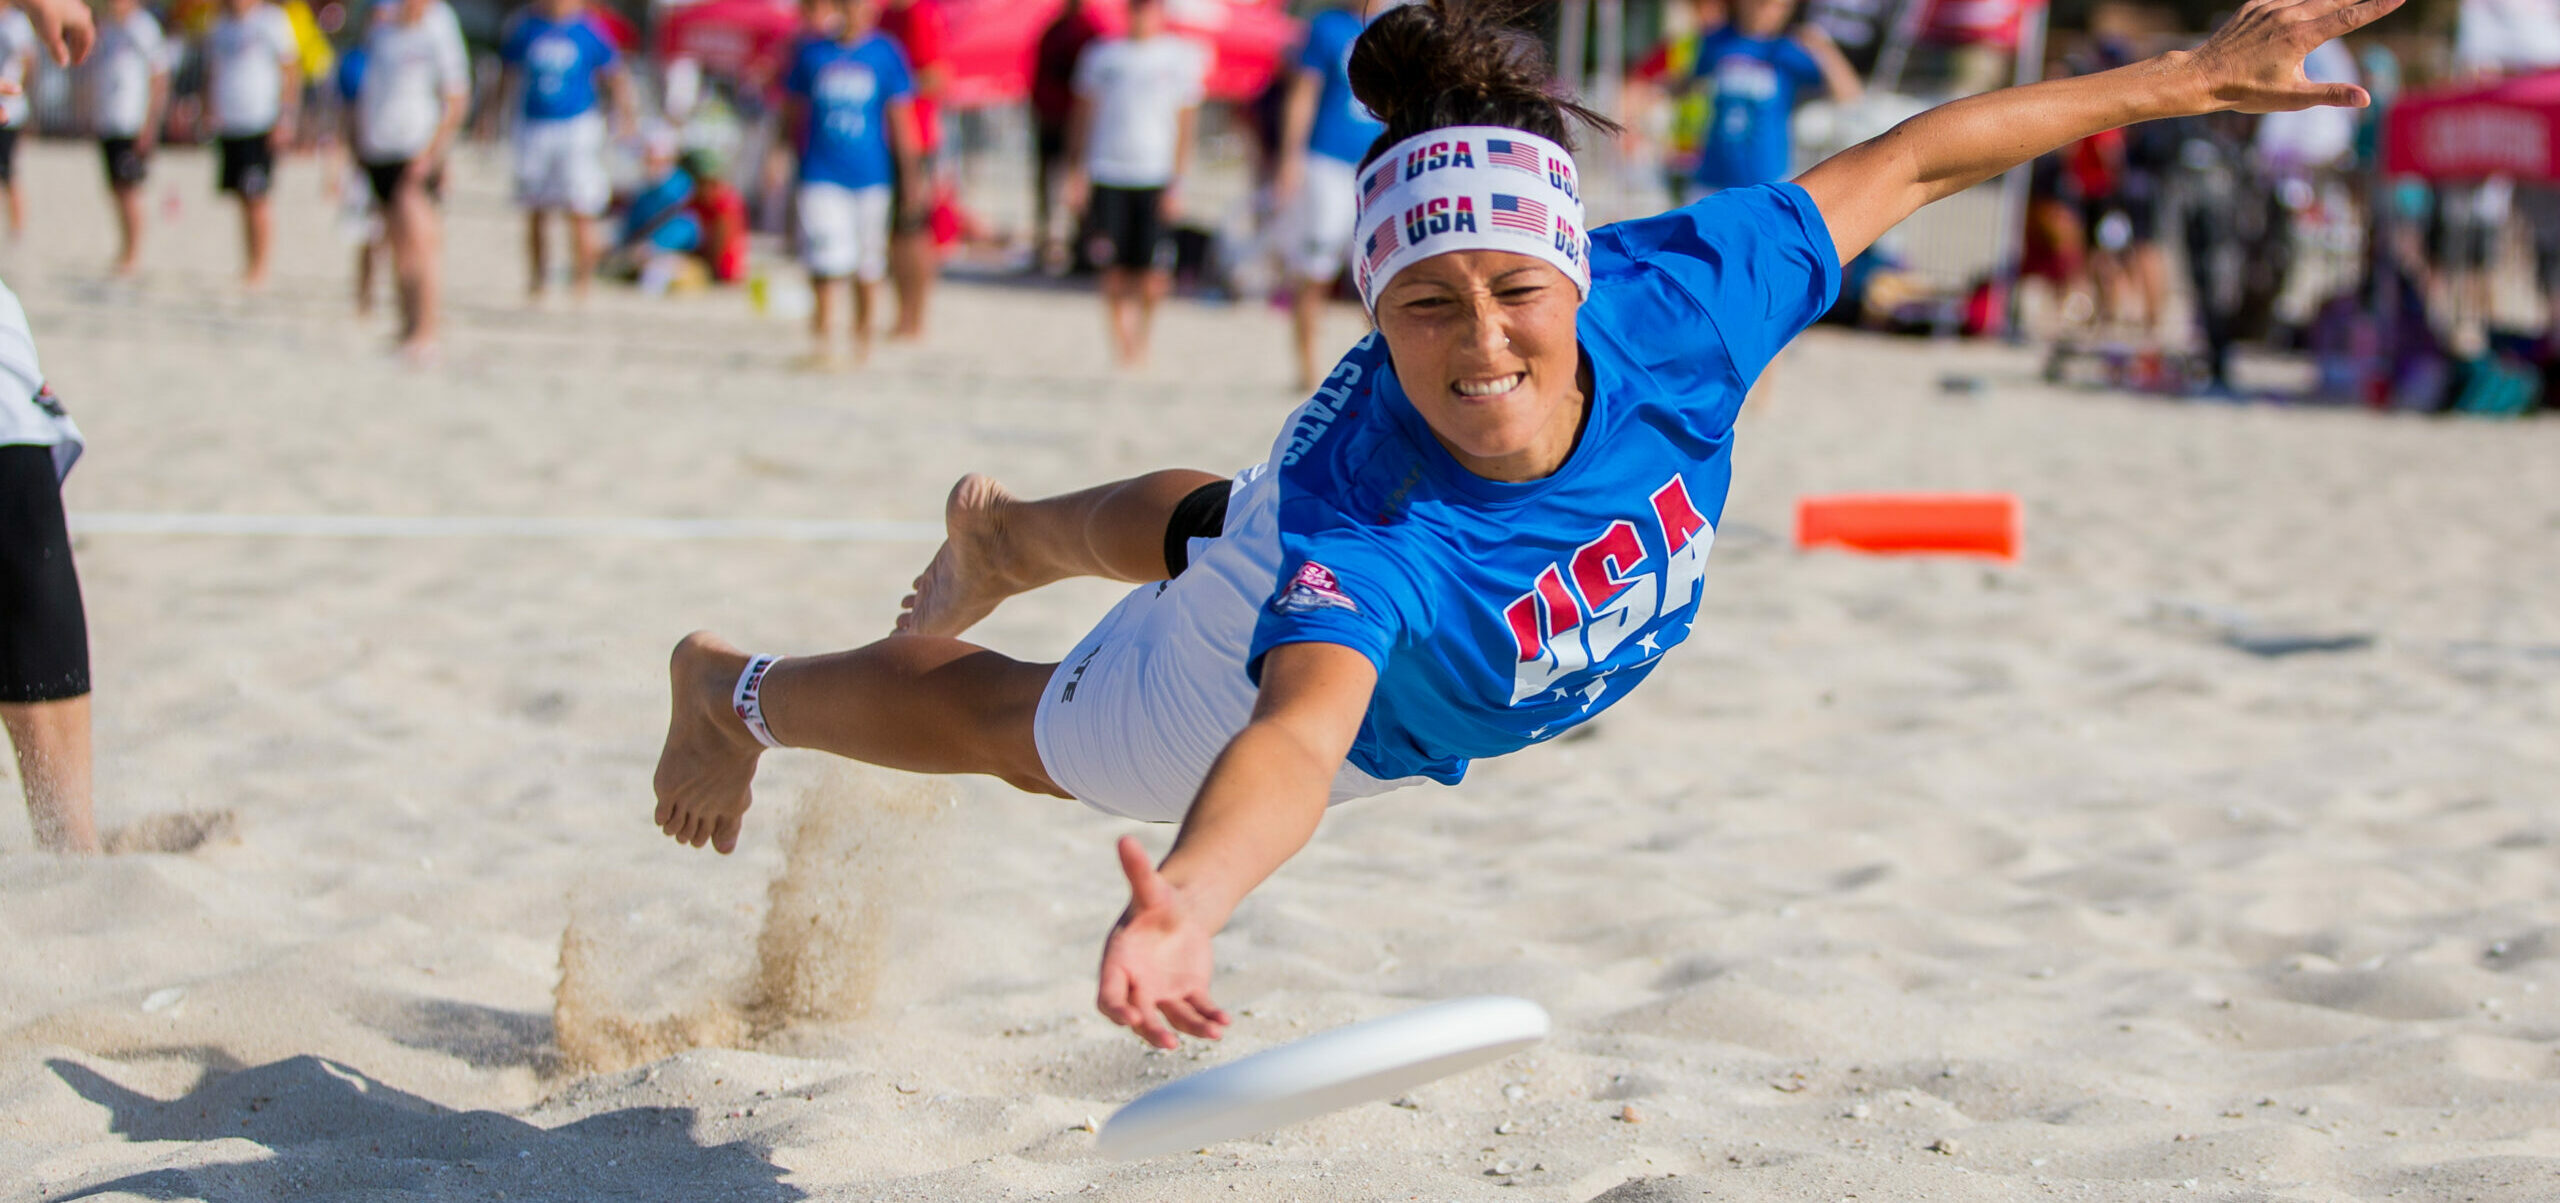 Overview - WGGMBUCC2021 - World Great Grand Master's Beach Ultimate -  Ultimate Central